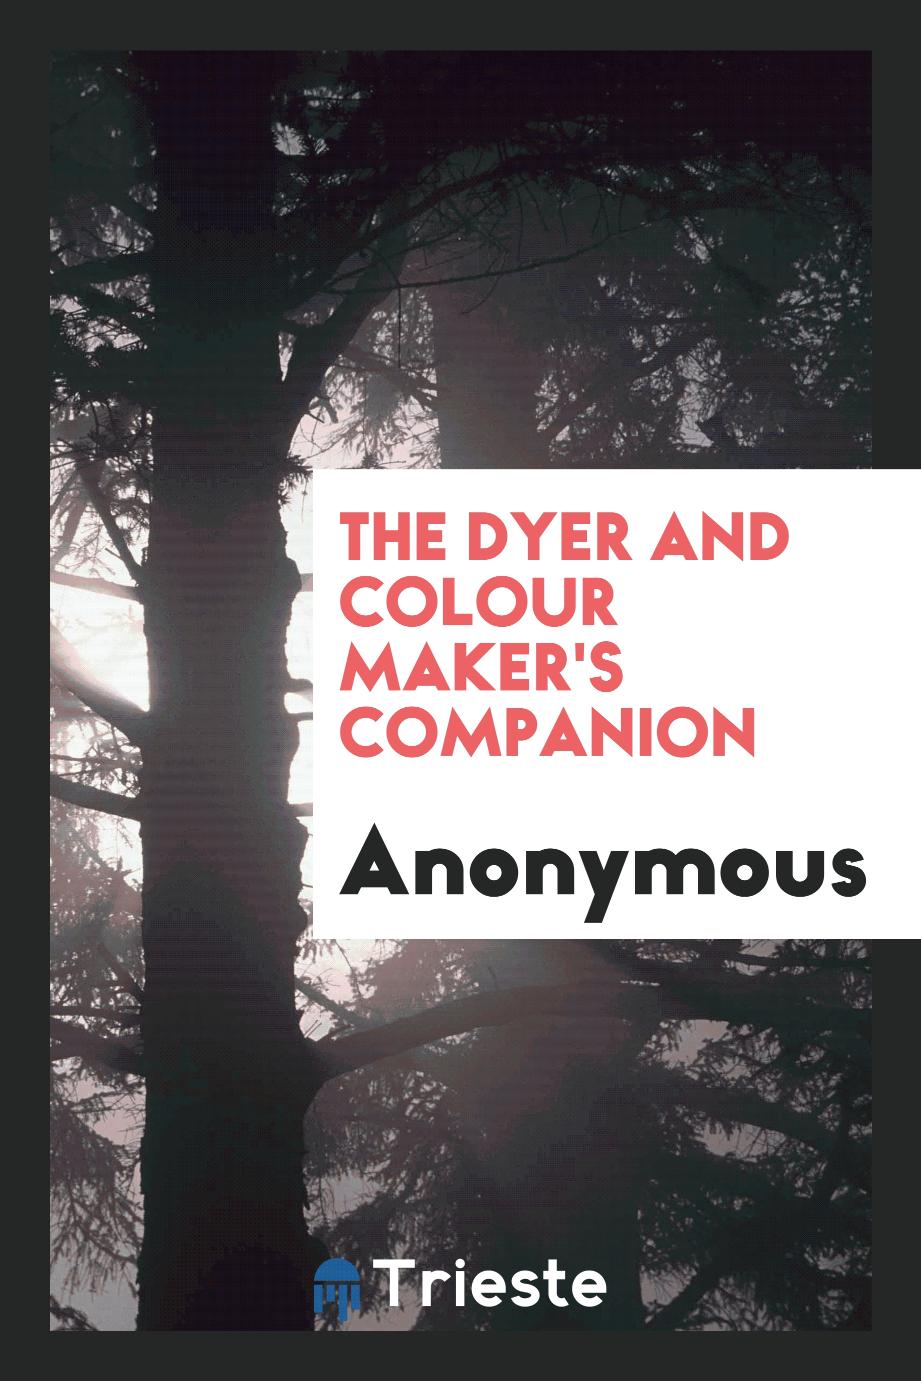 The Dyer and Colour Maker's Companion